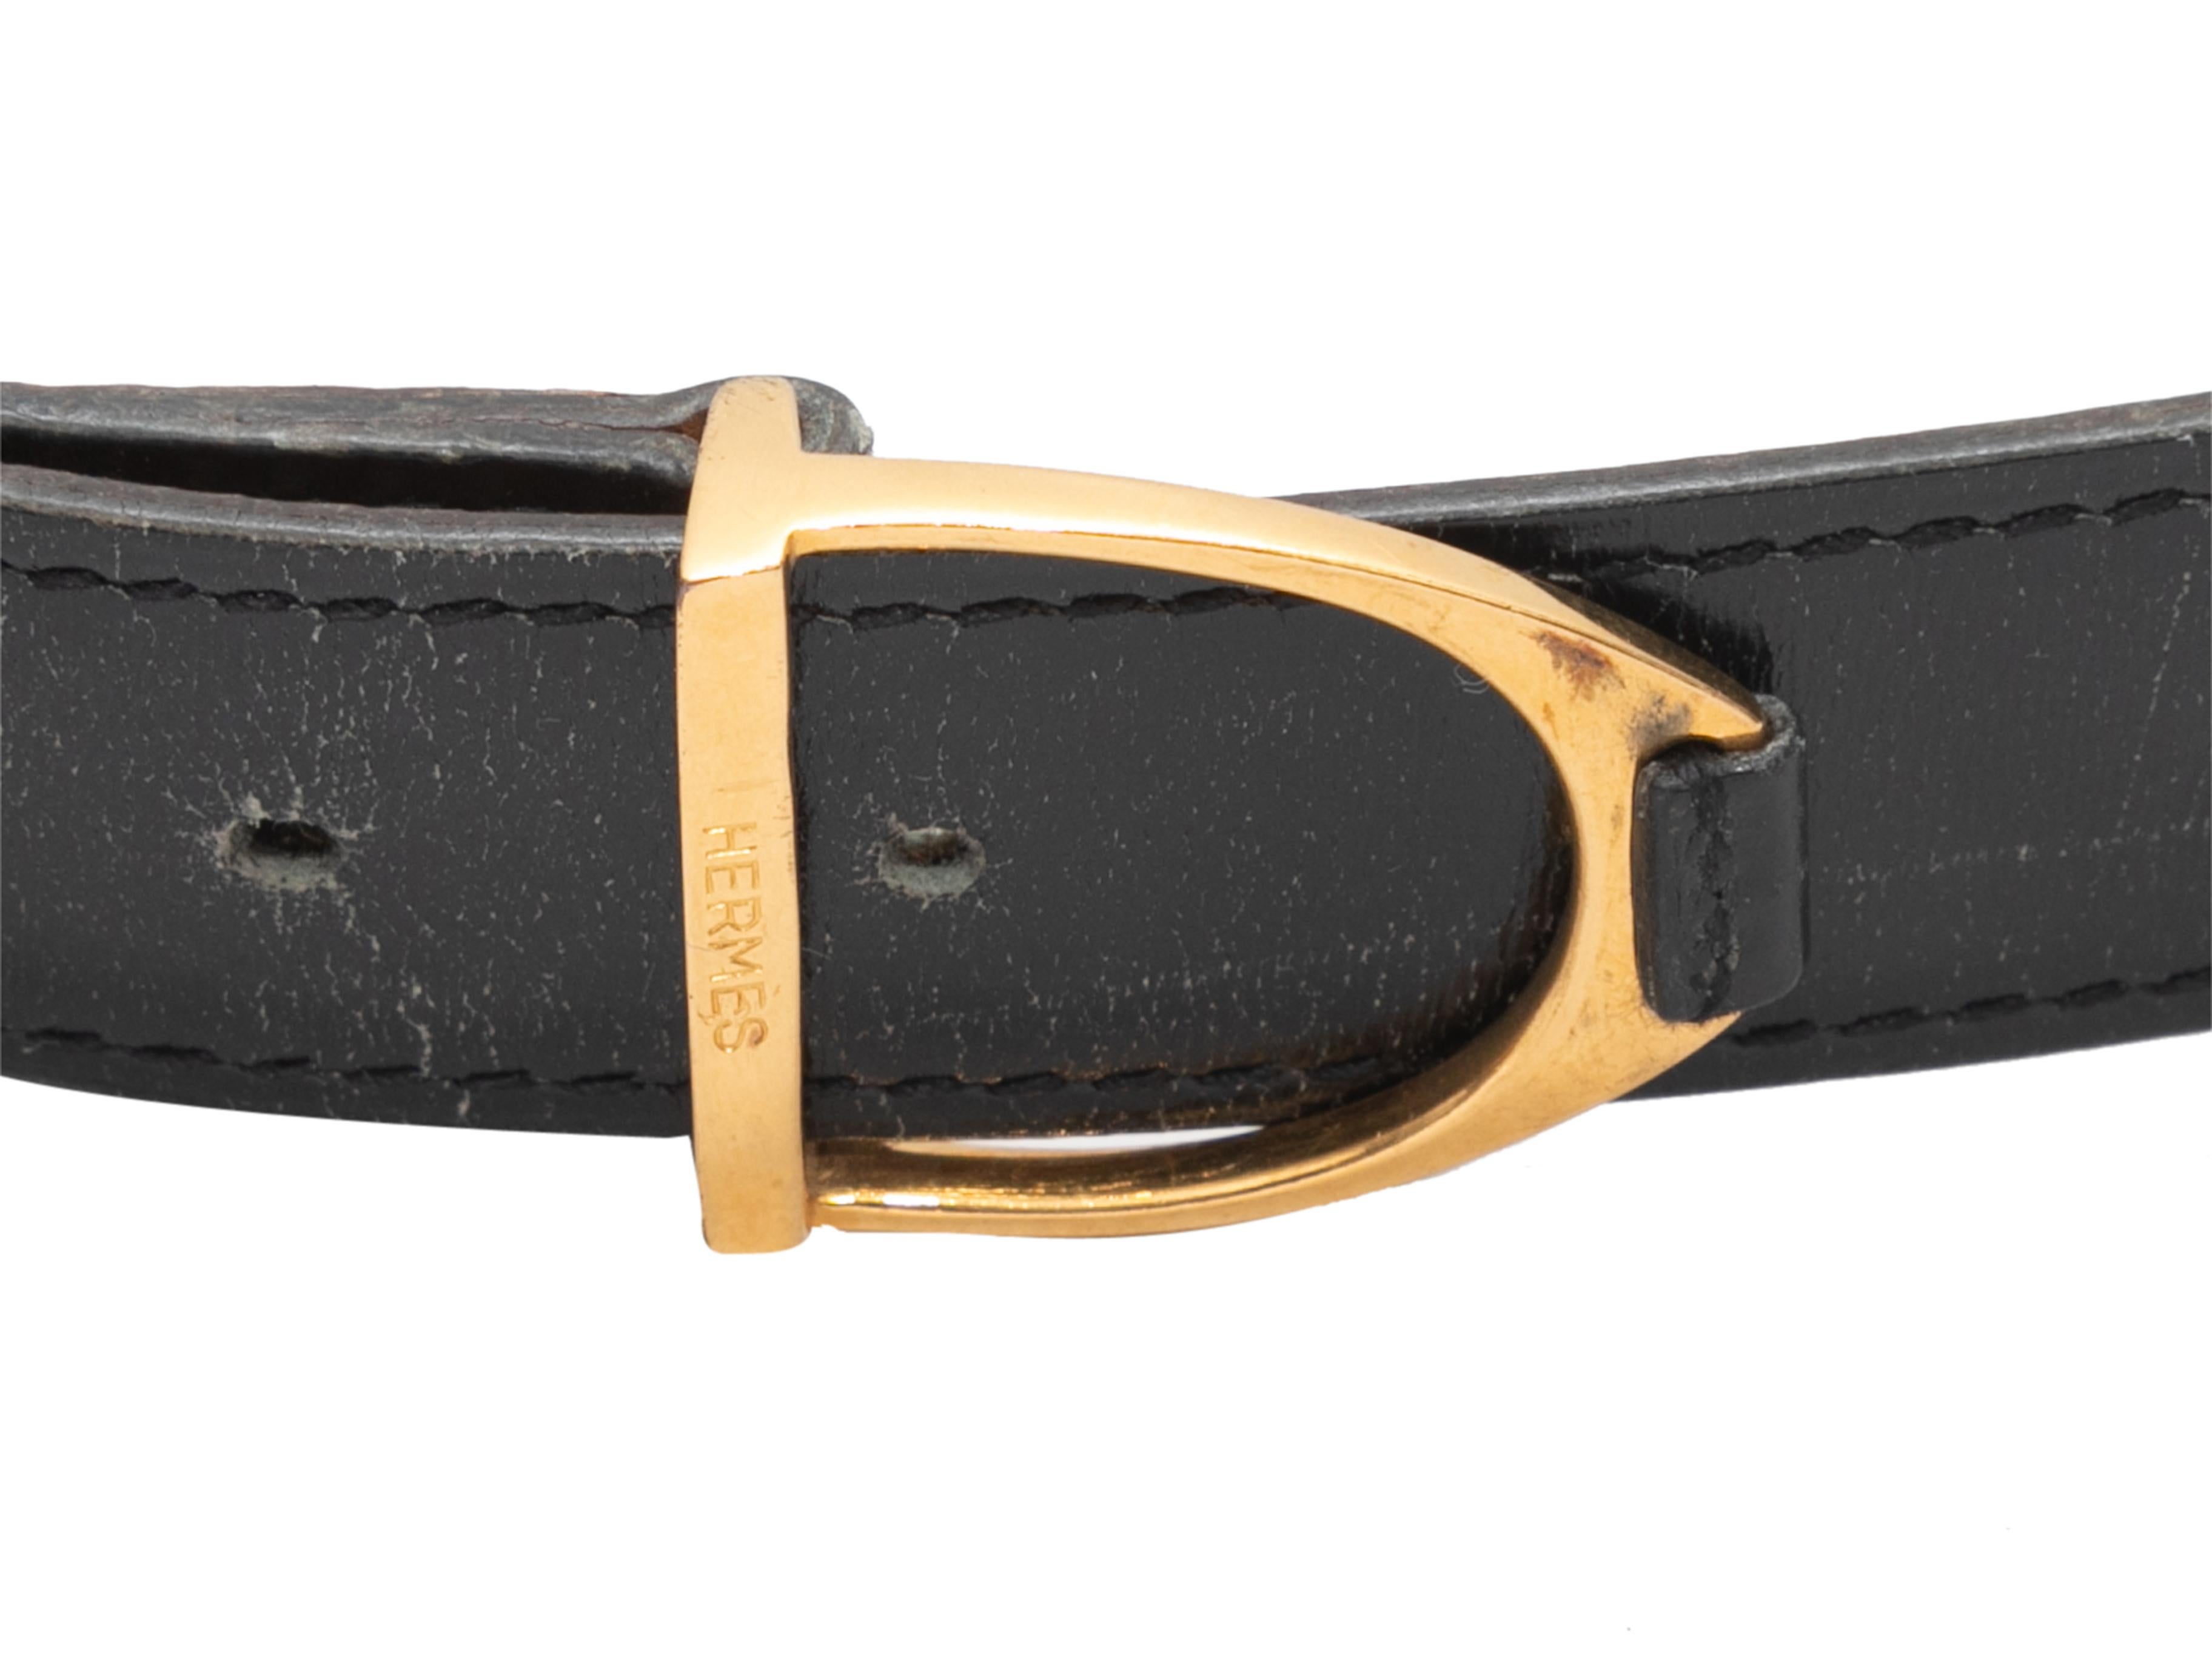 Black skinny leather belt by Hermes. Gold-tone peg-in-hole closure. 0.4